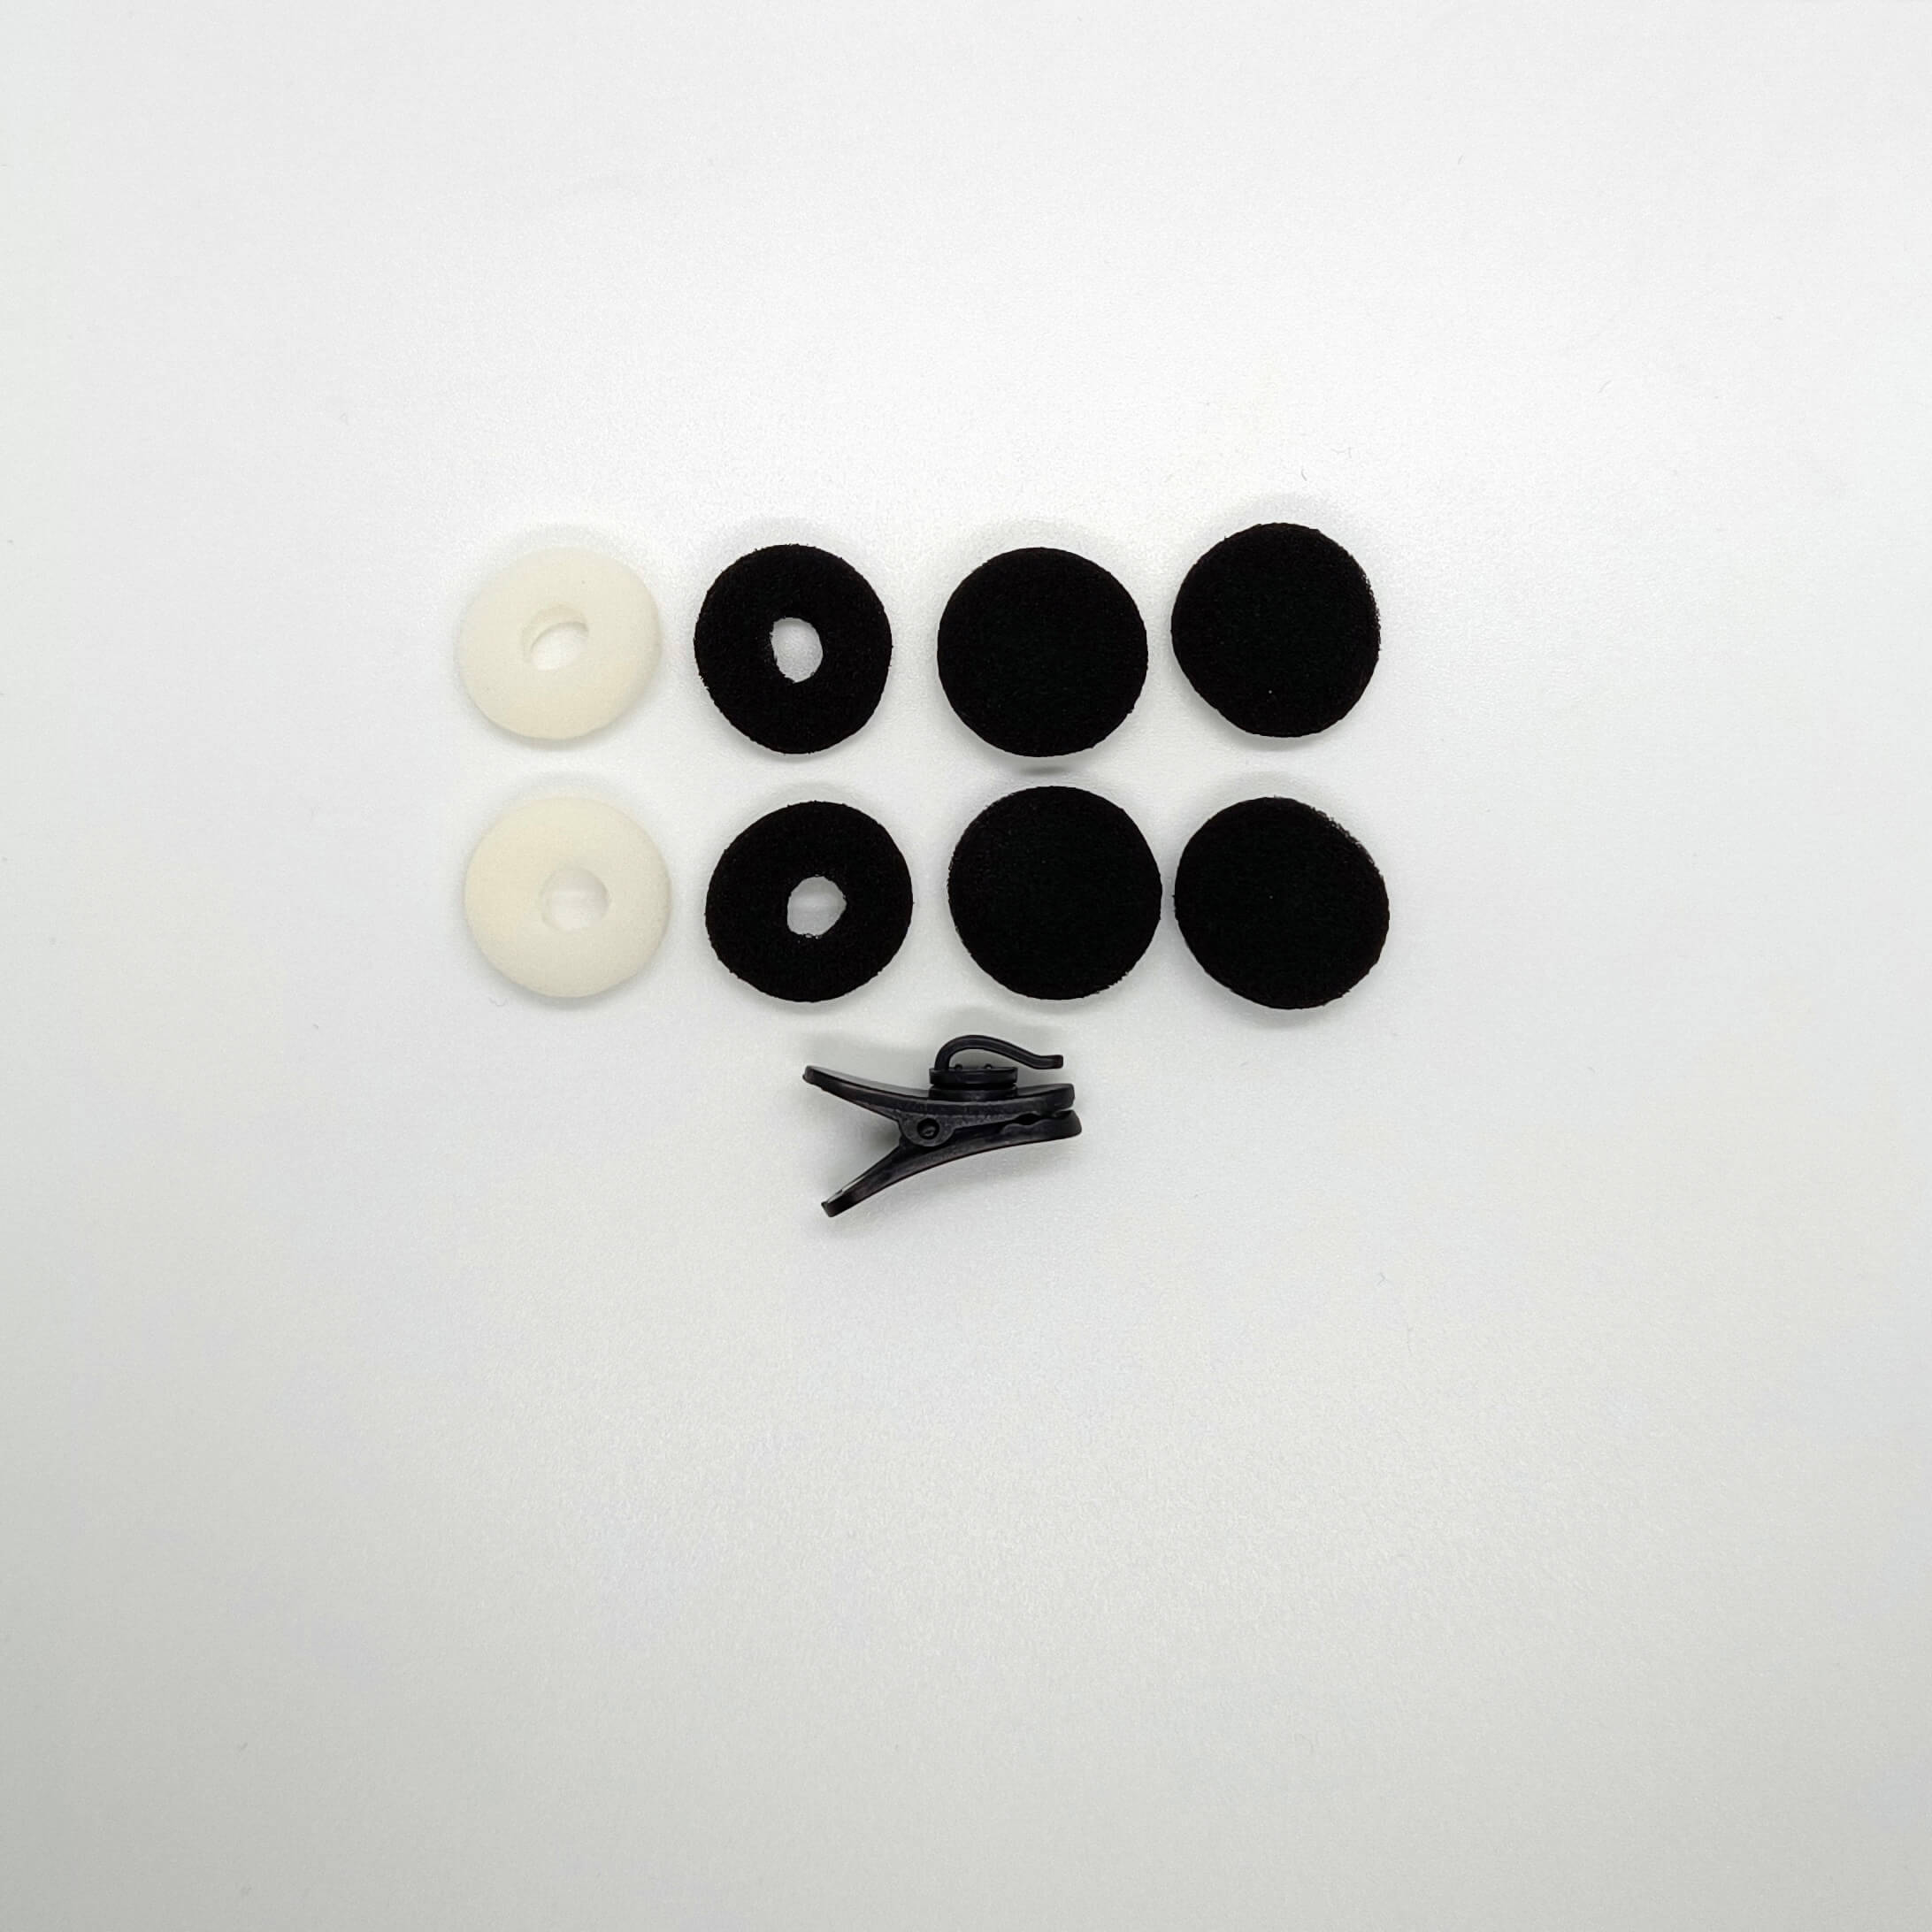 Buy Yincrow X6 Earbud at HiFiNage in India with warranty.